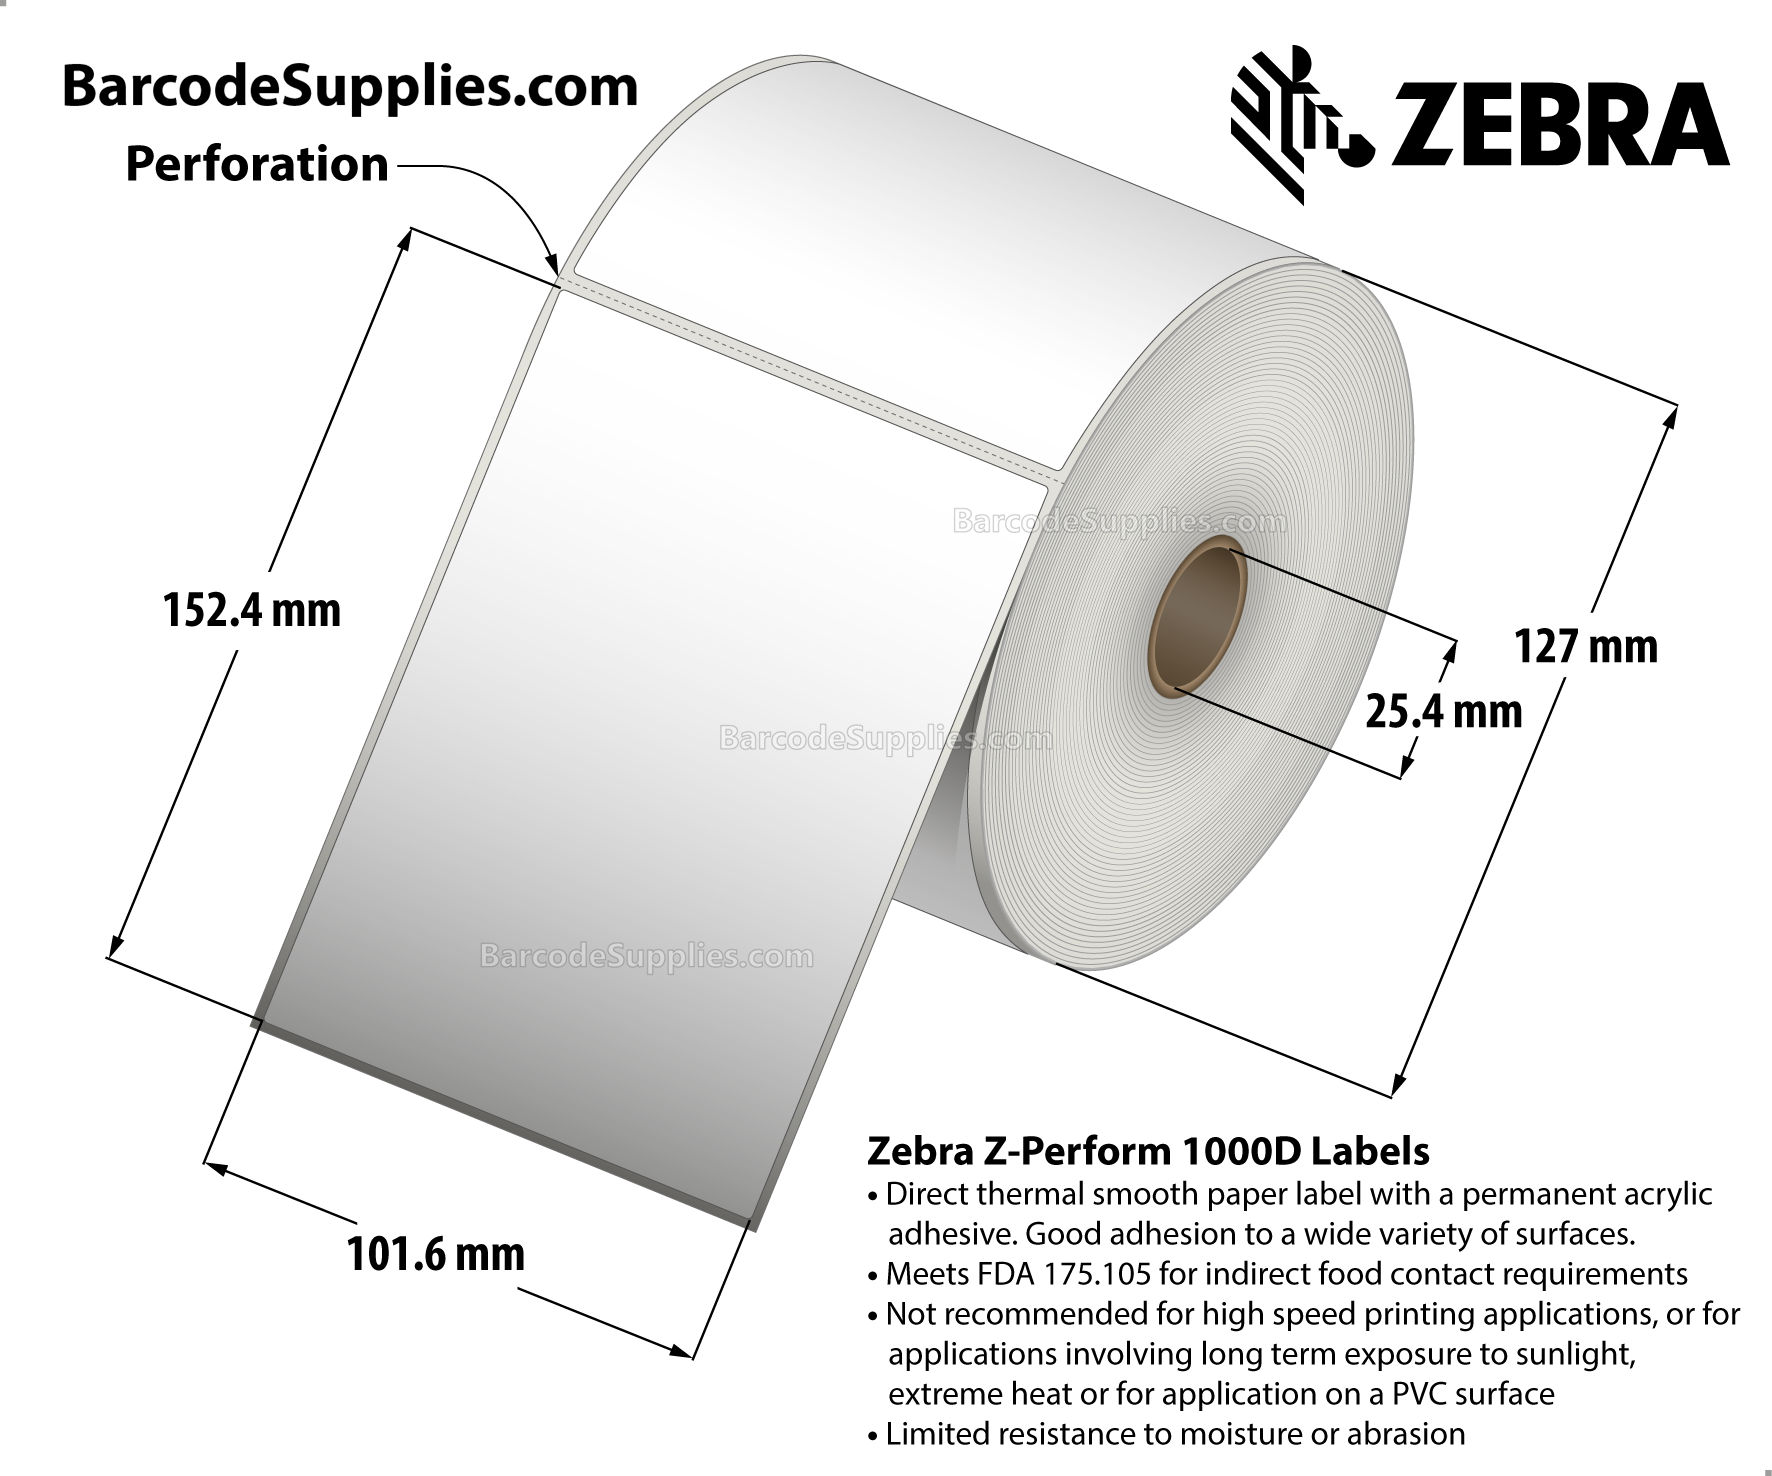 4 x 6 Direct Thermal White Z-Perform 1000D Labels With Permanent Adhesive - Perforated - 430 Labels Per Roll - Carton Of 6 Rolls - 2580 Labels Total - MPN: 10026382